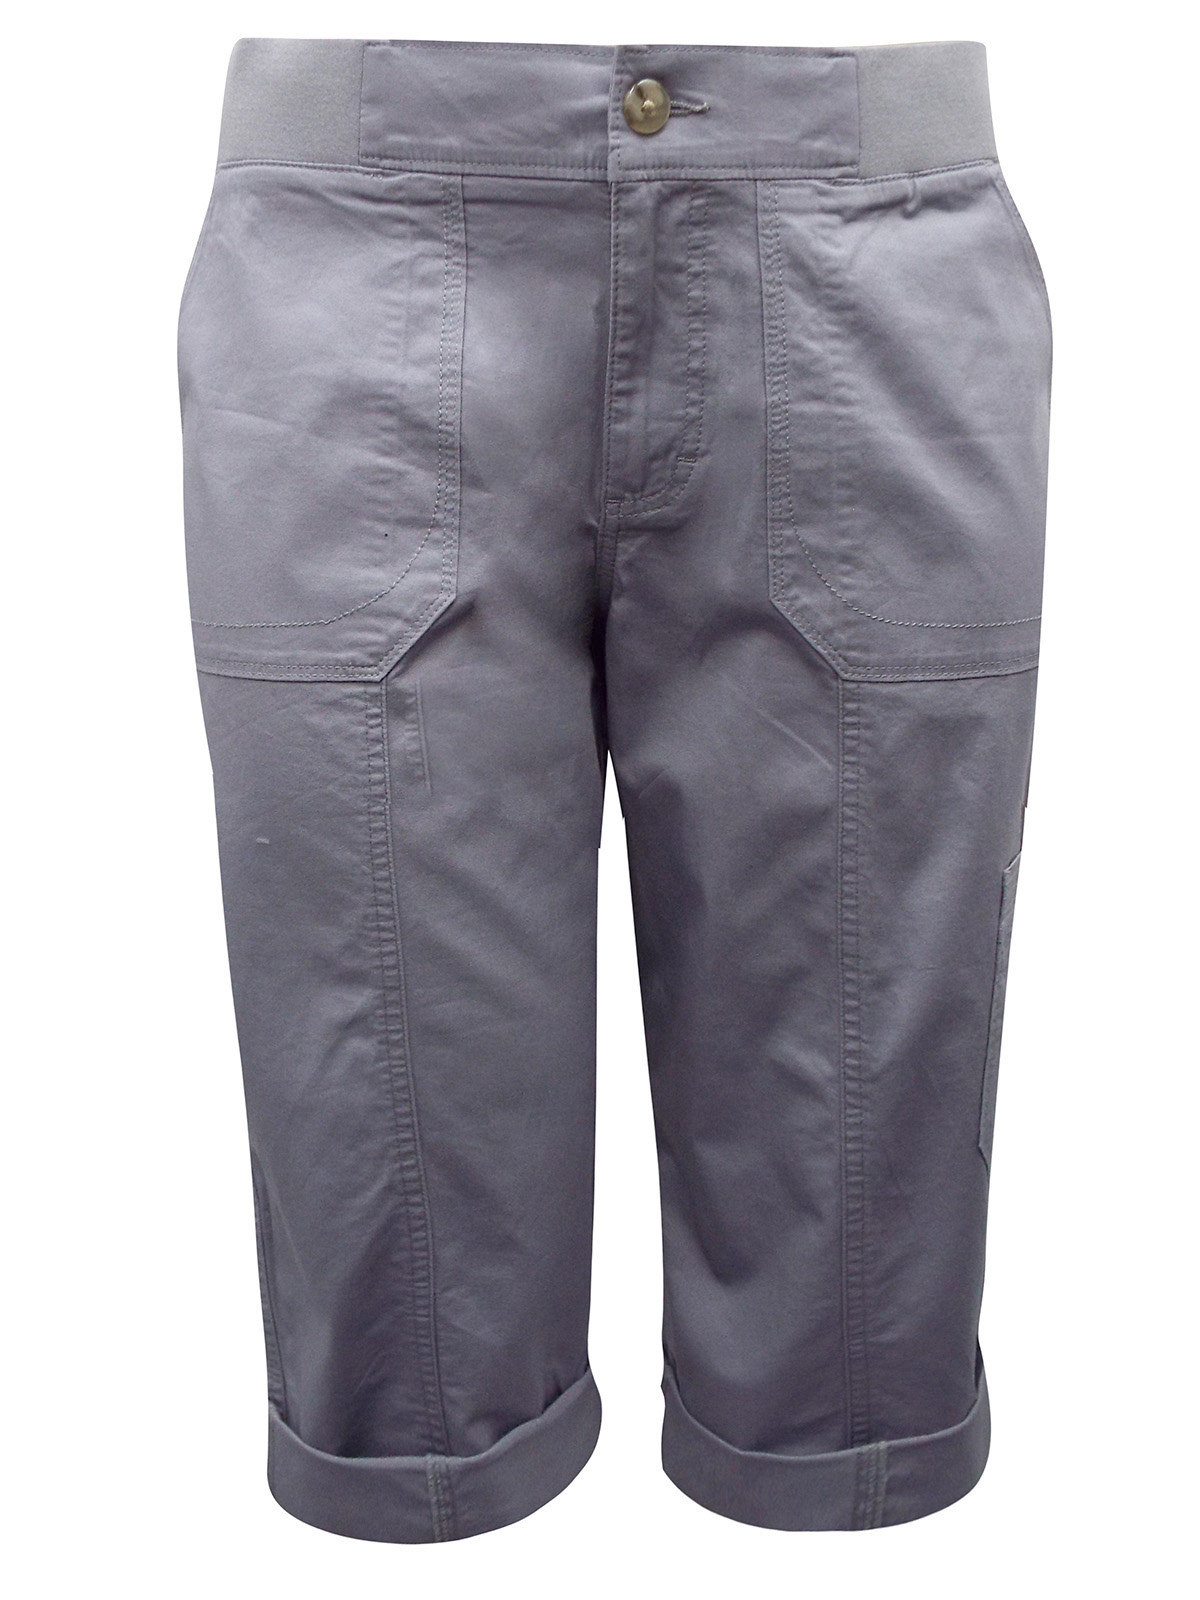 Lee - - Riders by Lee GREY Cotton Rich Cropped Trousers - Plus Size 18